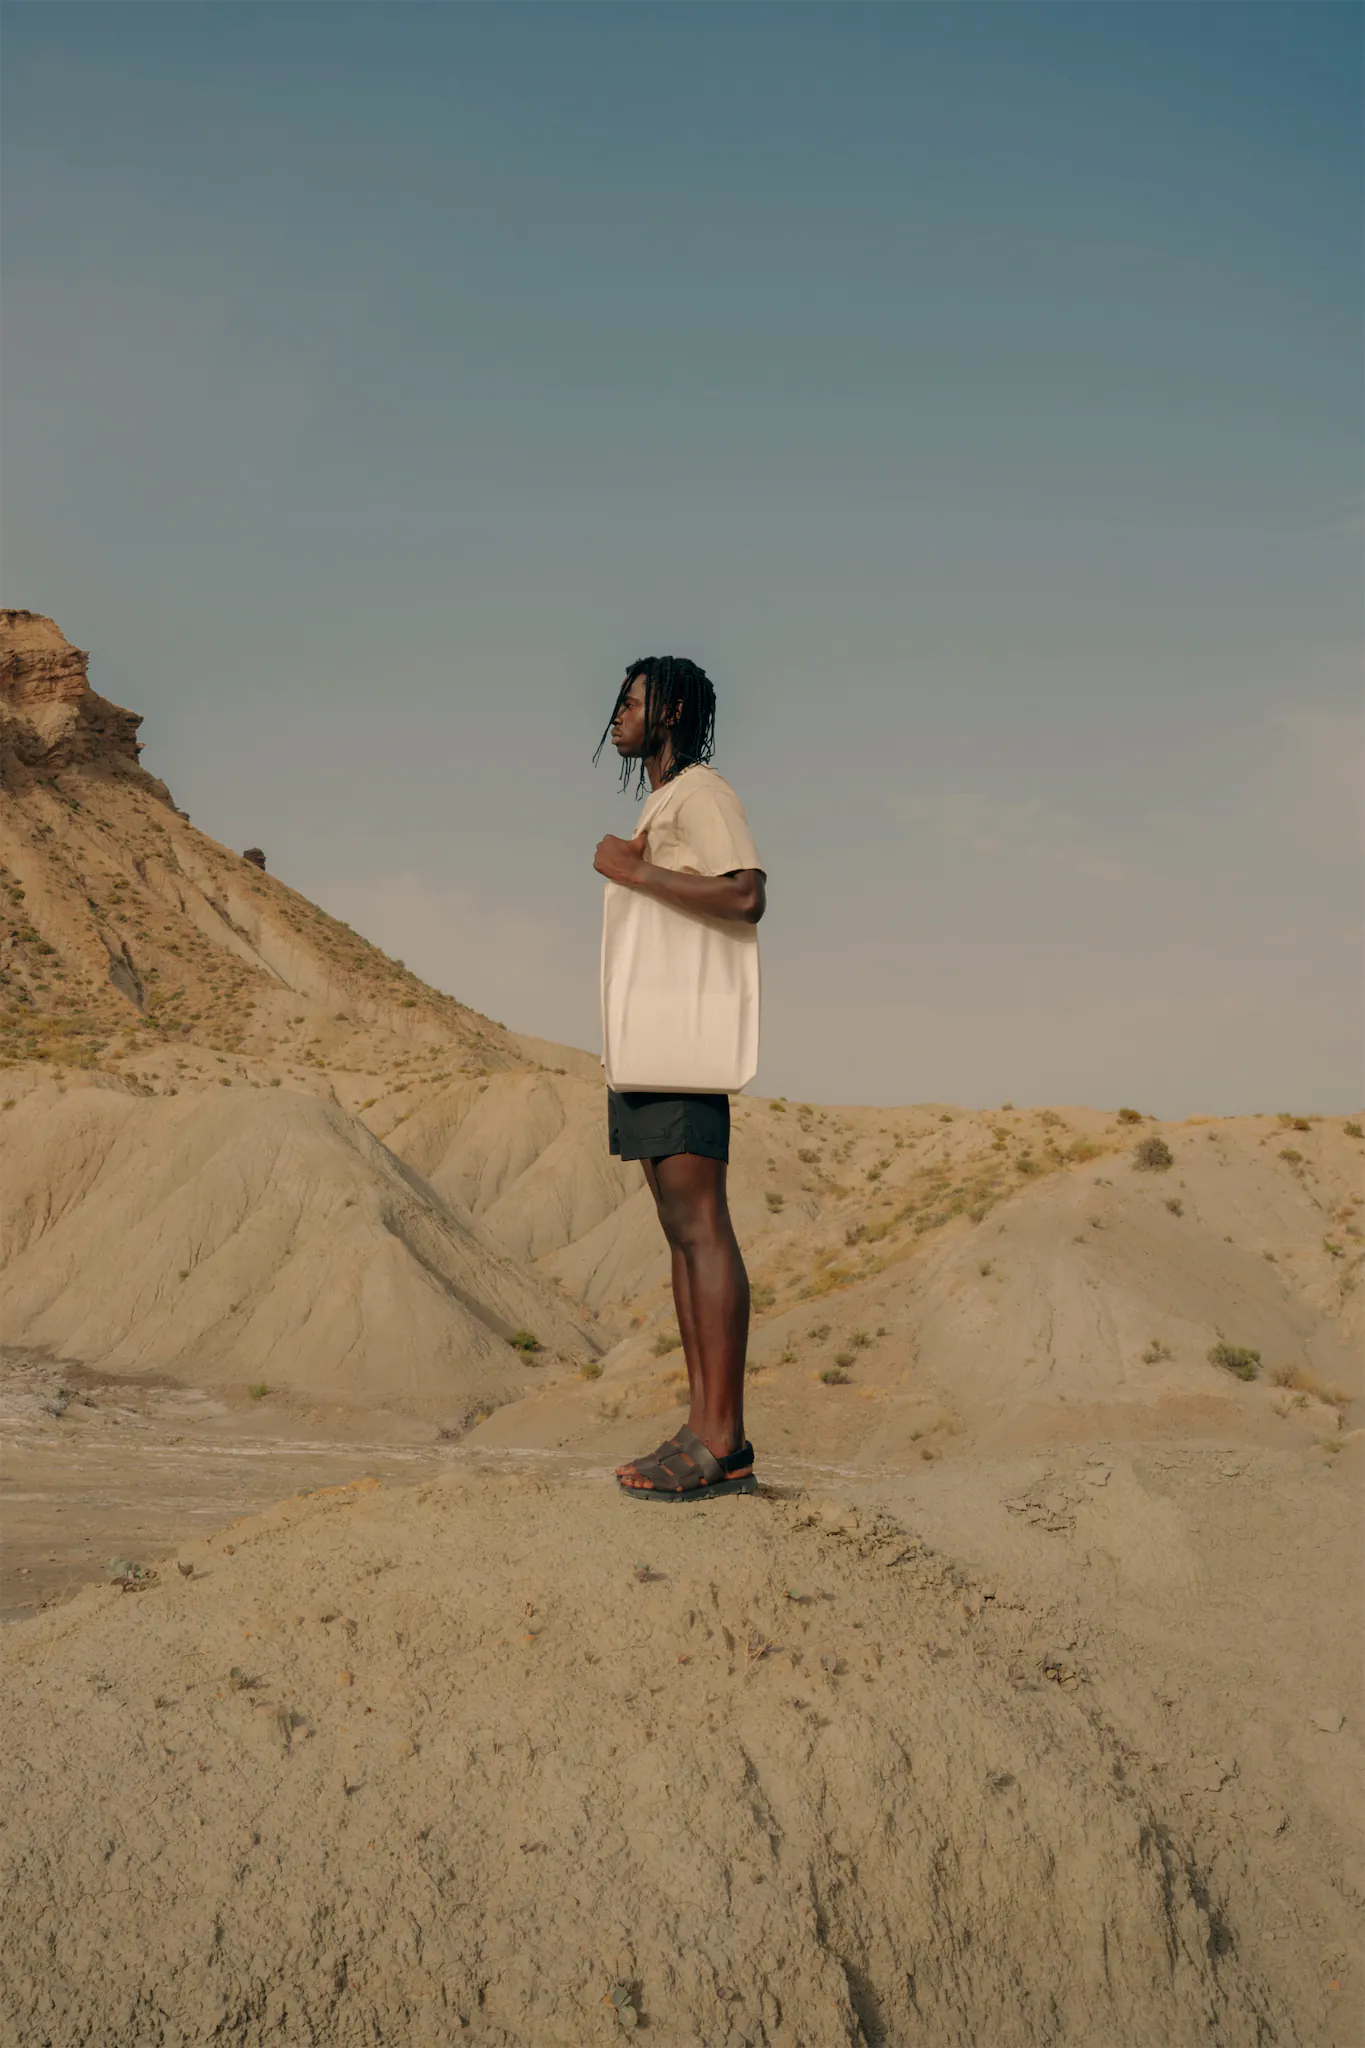 Dark-skinned person wearing a tote bag mock-up on top of a mound in a desert environment